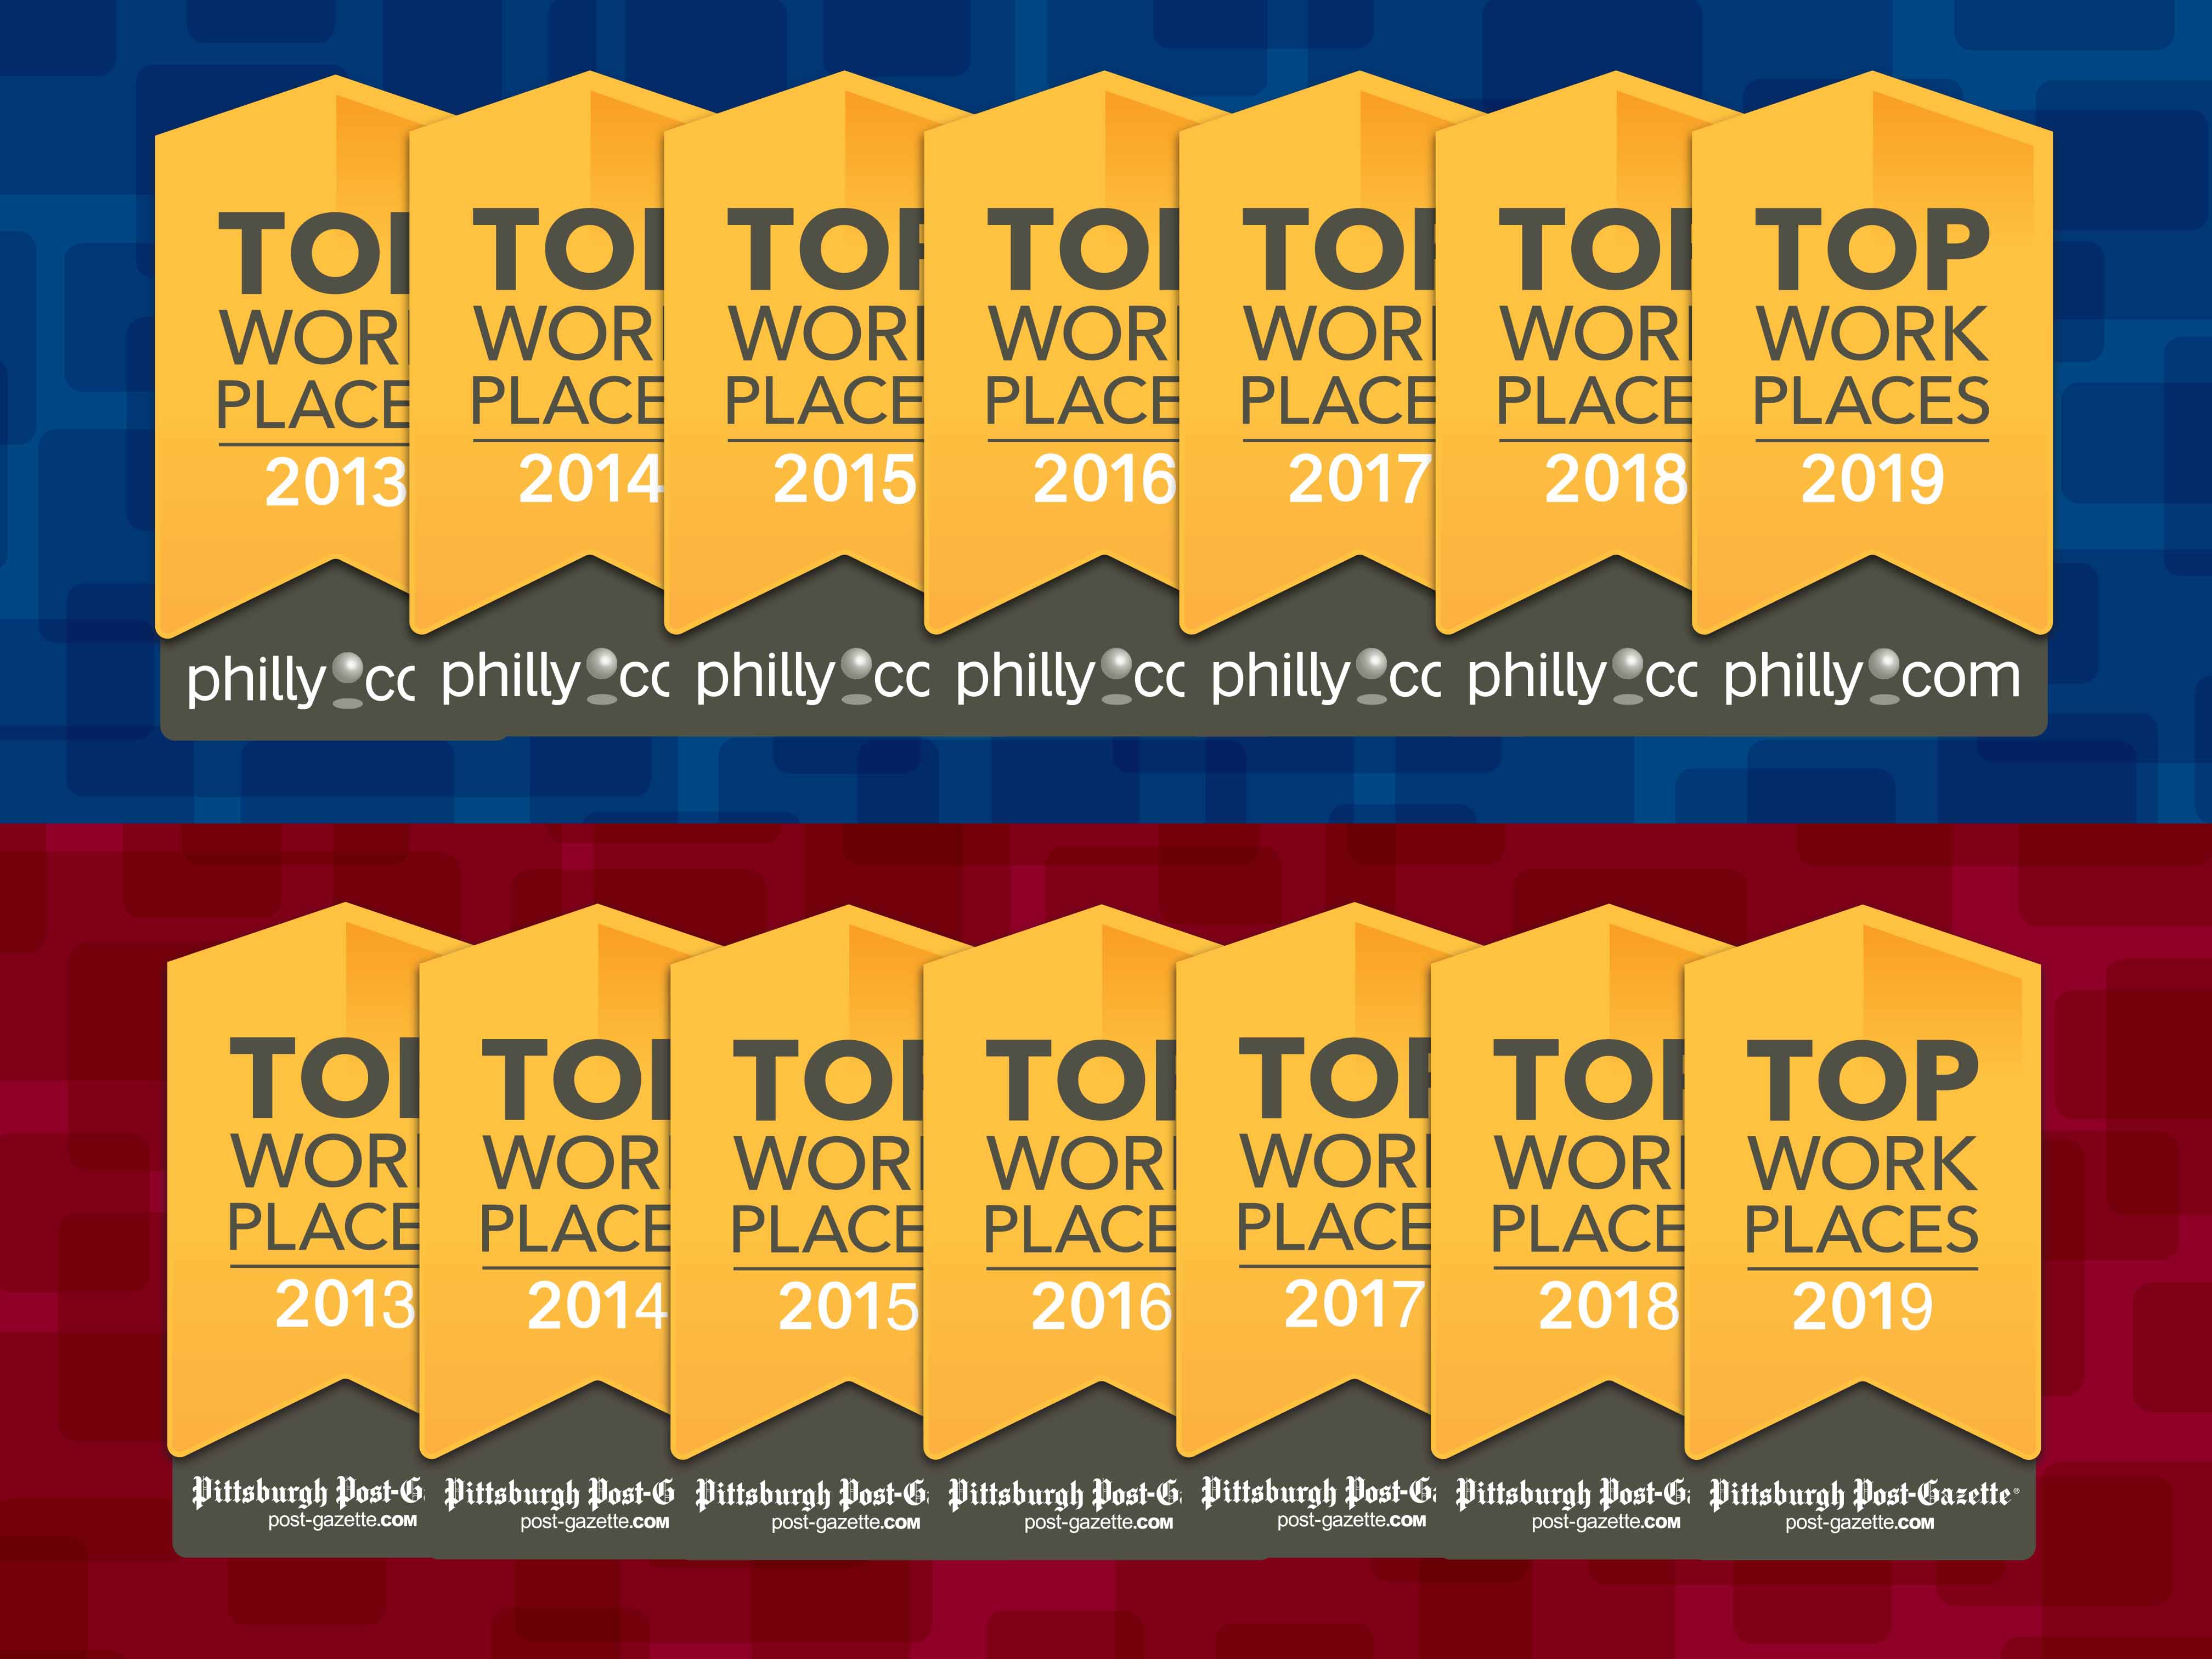 Fifteen Top Workplaces awards.